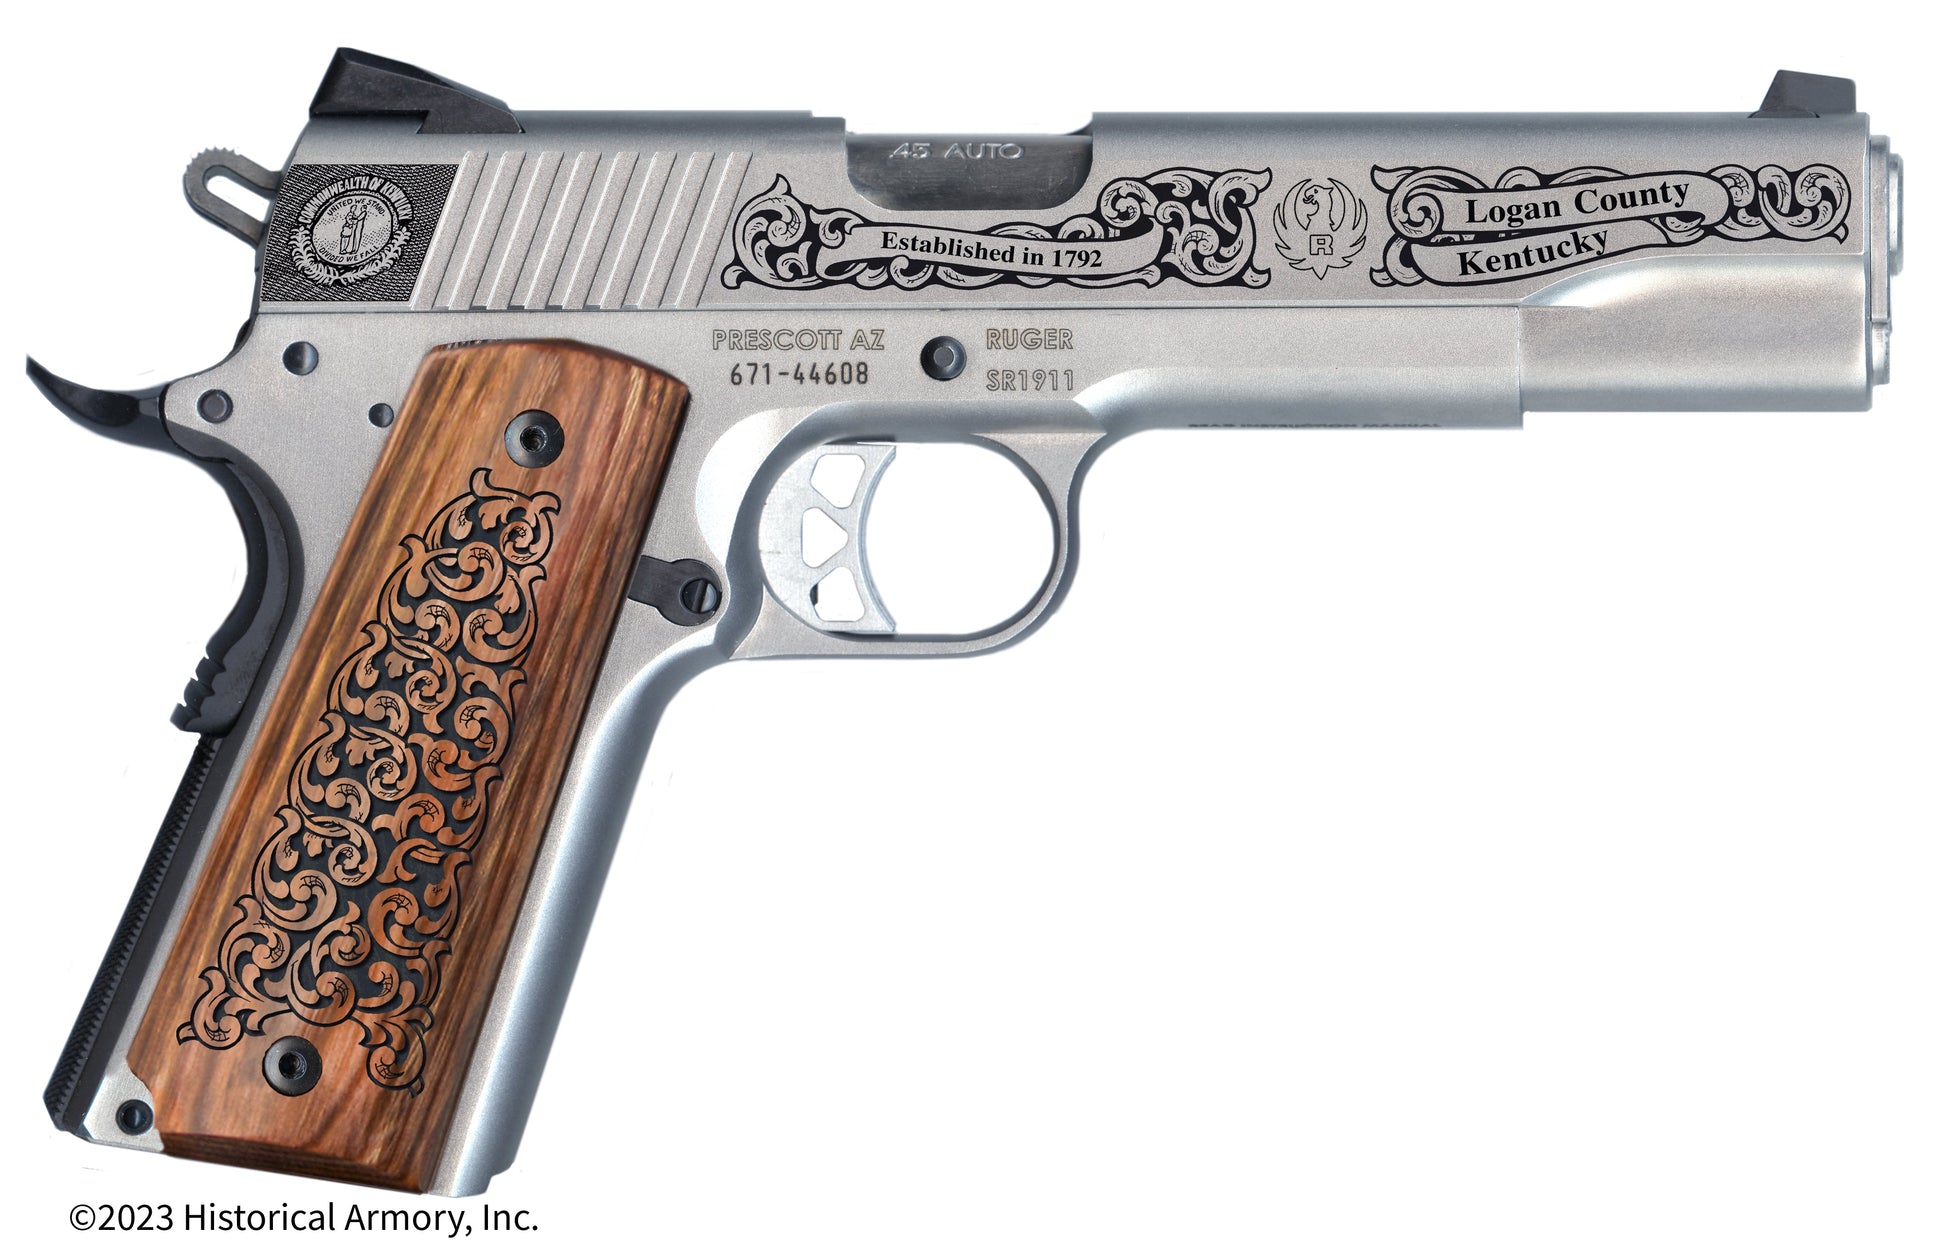 Logan County Kentucky Engraved .45 Auto Ruger 1911